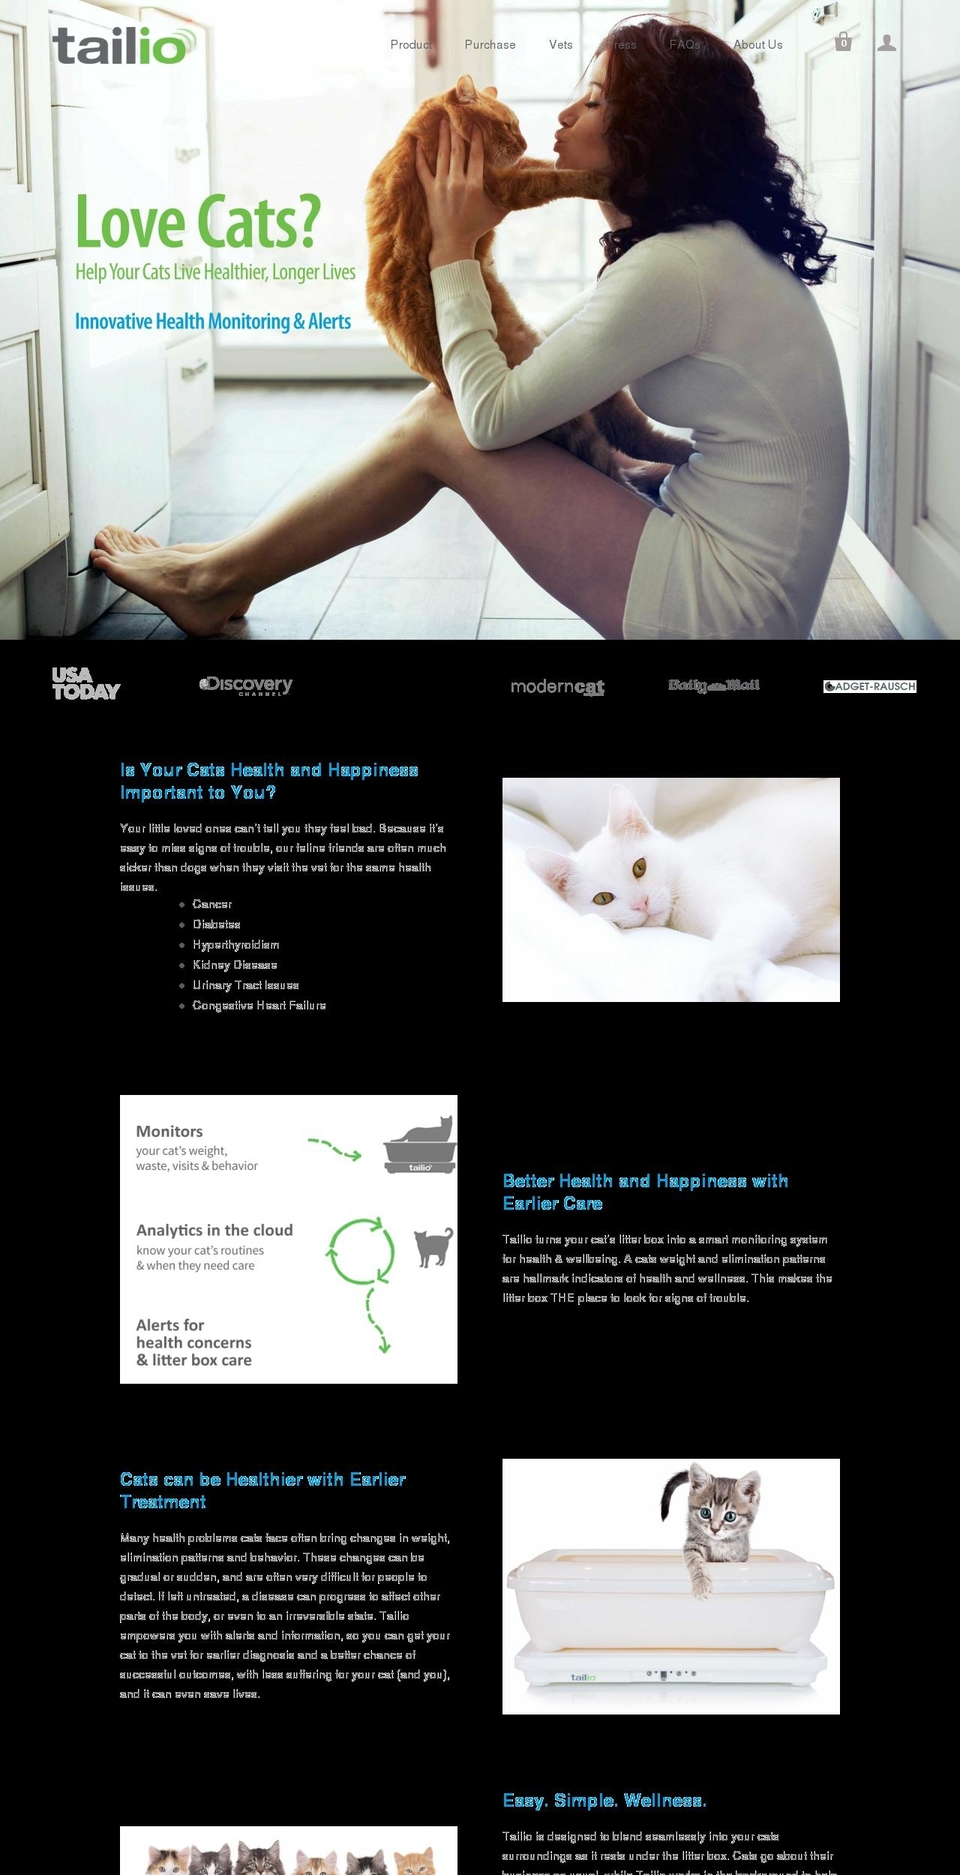 Copy of Copy of Startup before Bold QB 10\/27 Shopify theme site example getthetailio.com